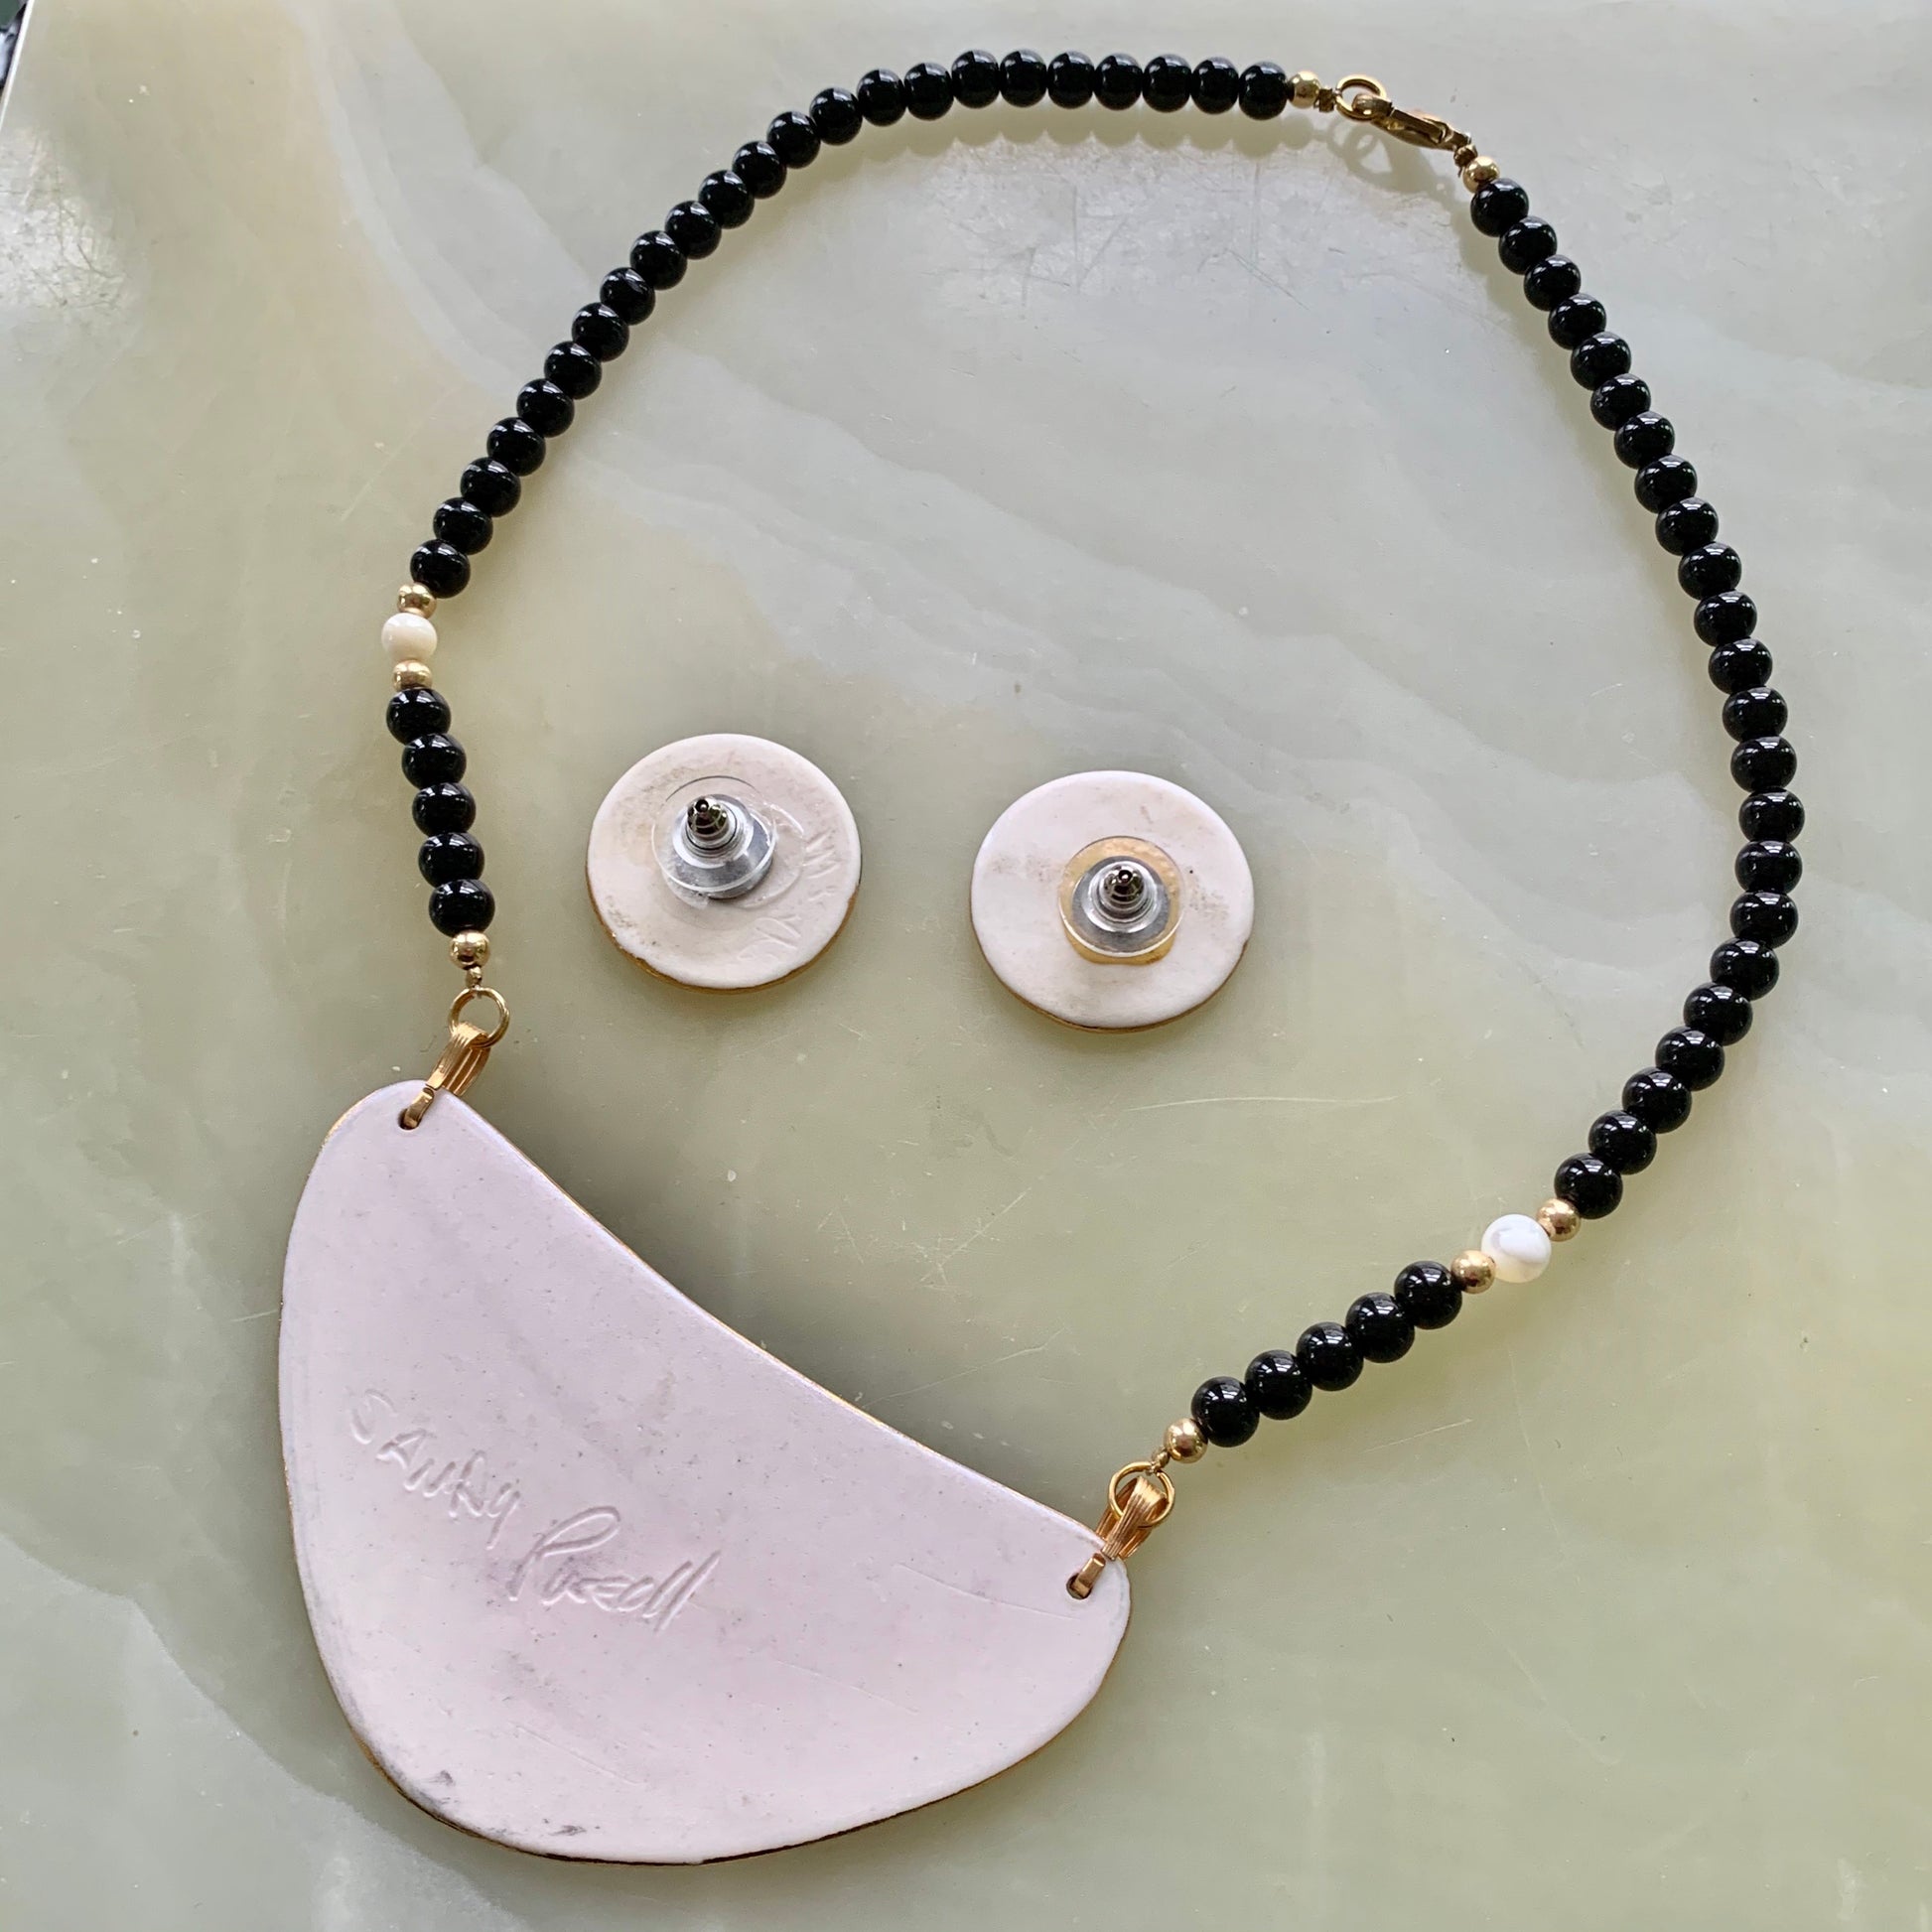 Vintage Sandy Russell Porcelain Onyx & Mother of Pearl Necklace & Earrings Set - Lady Slippers